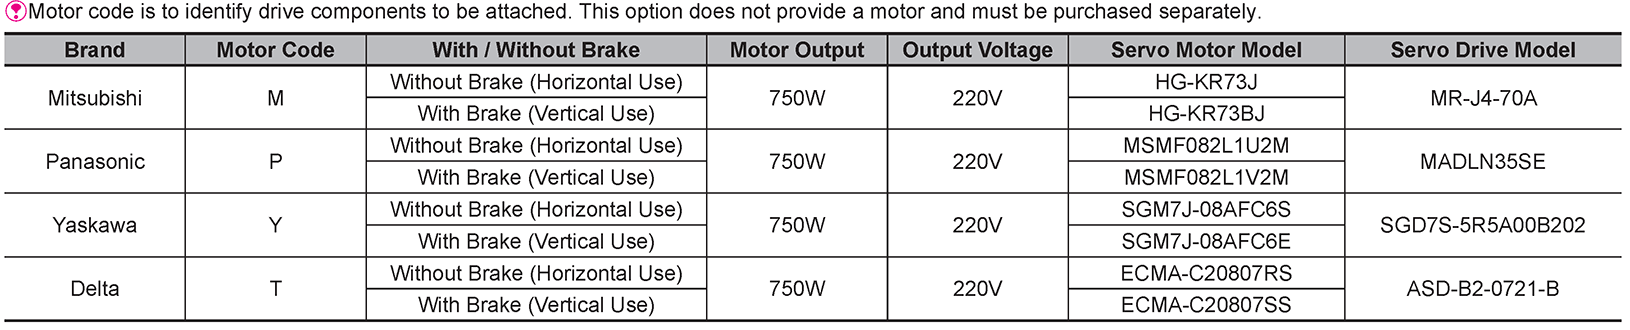 Recommended Motor